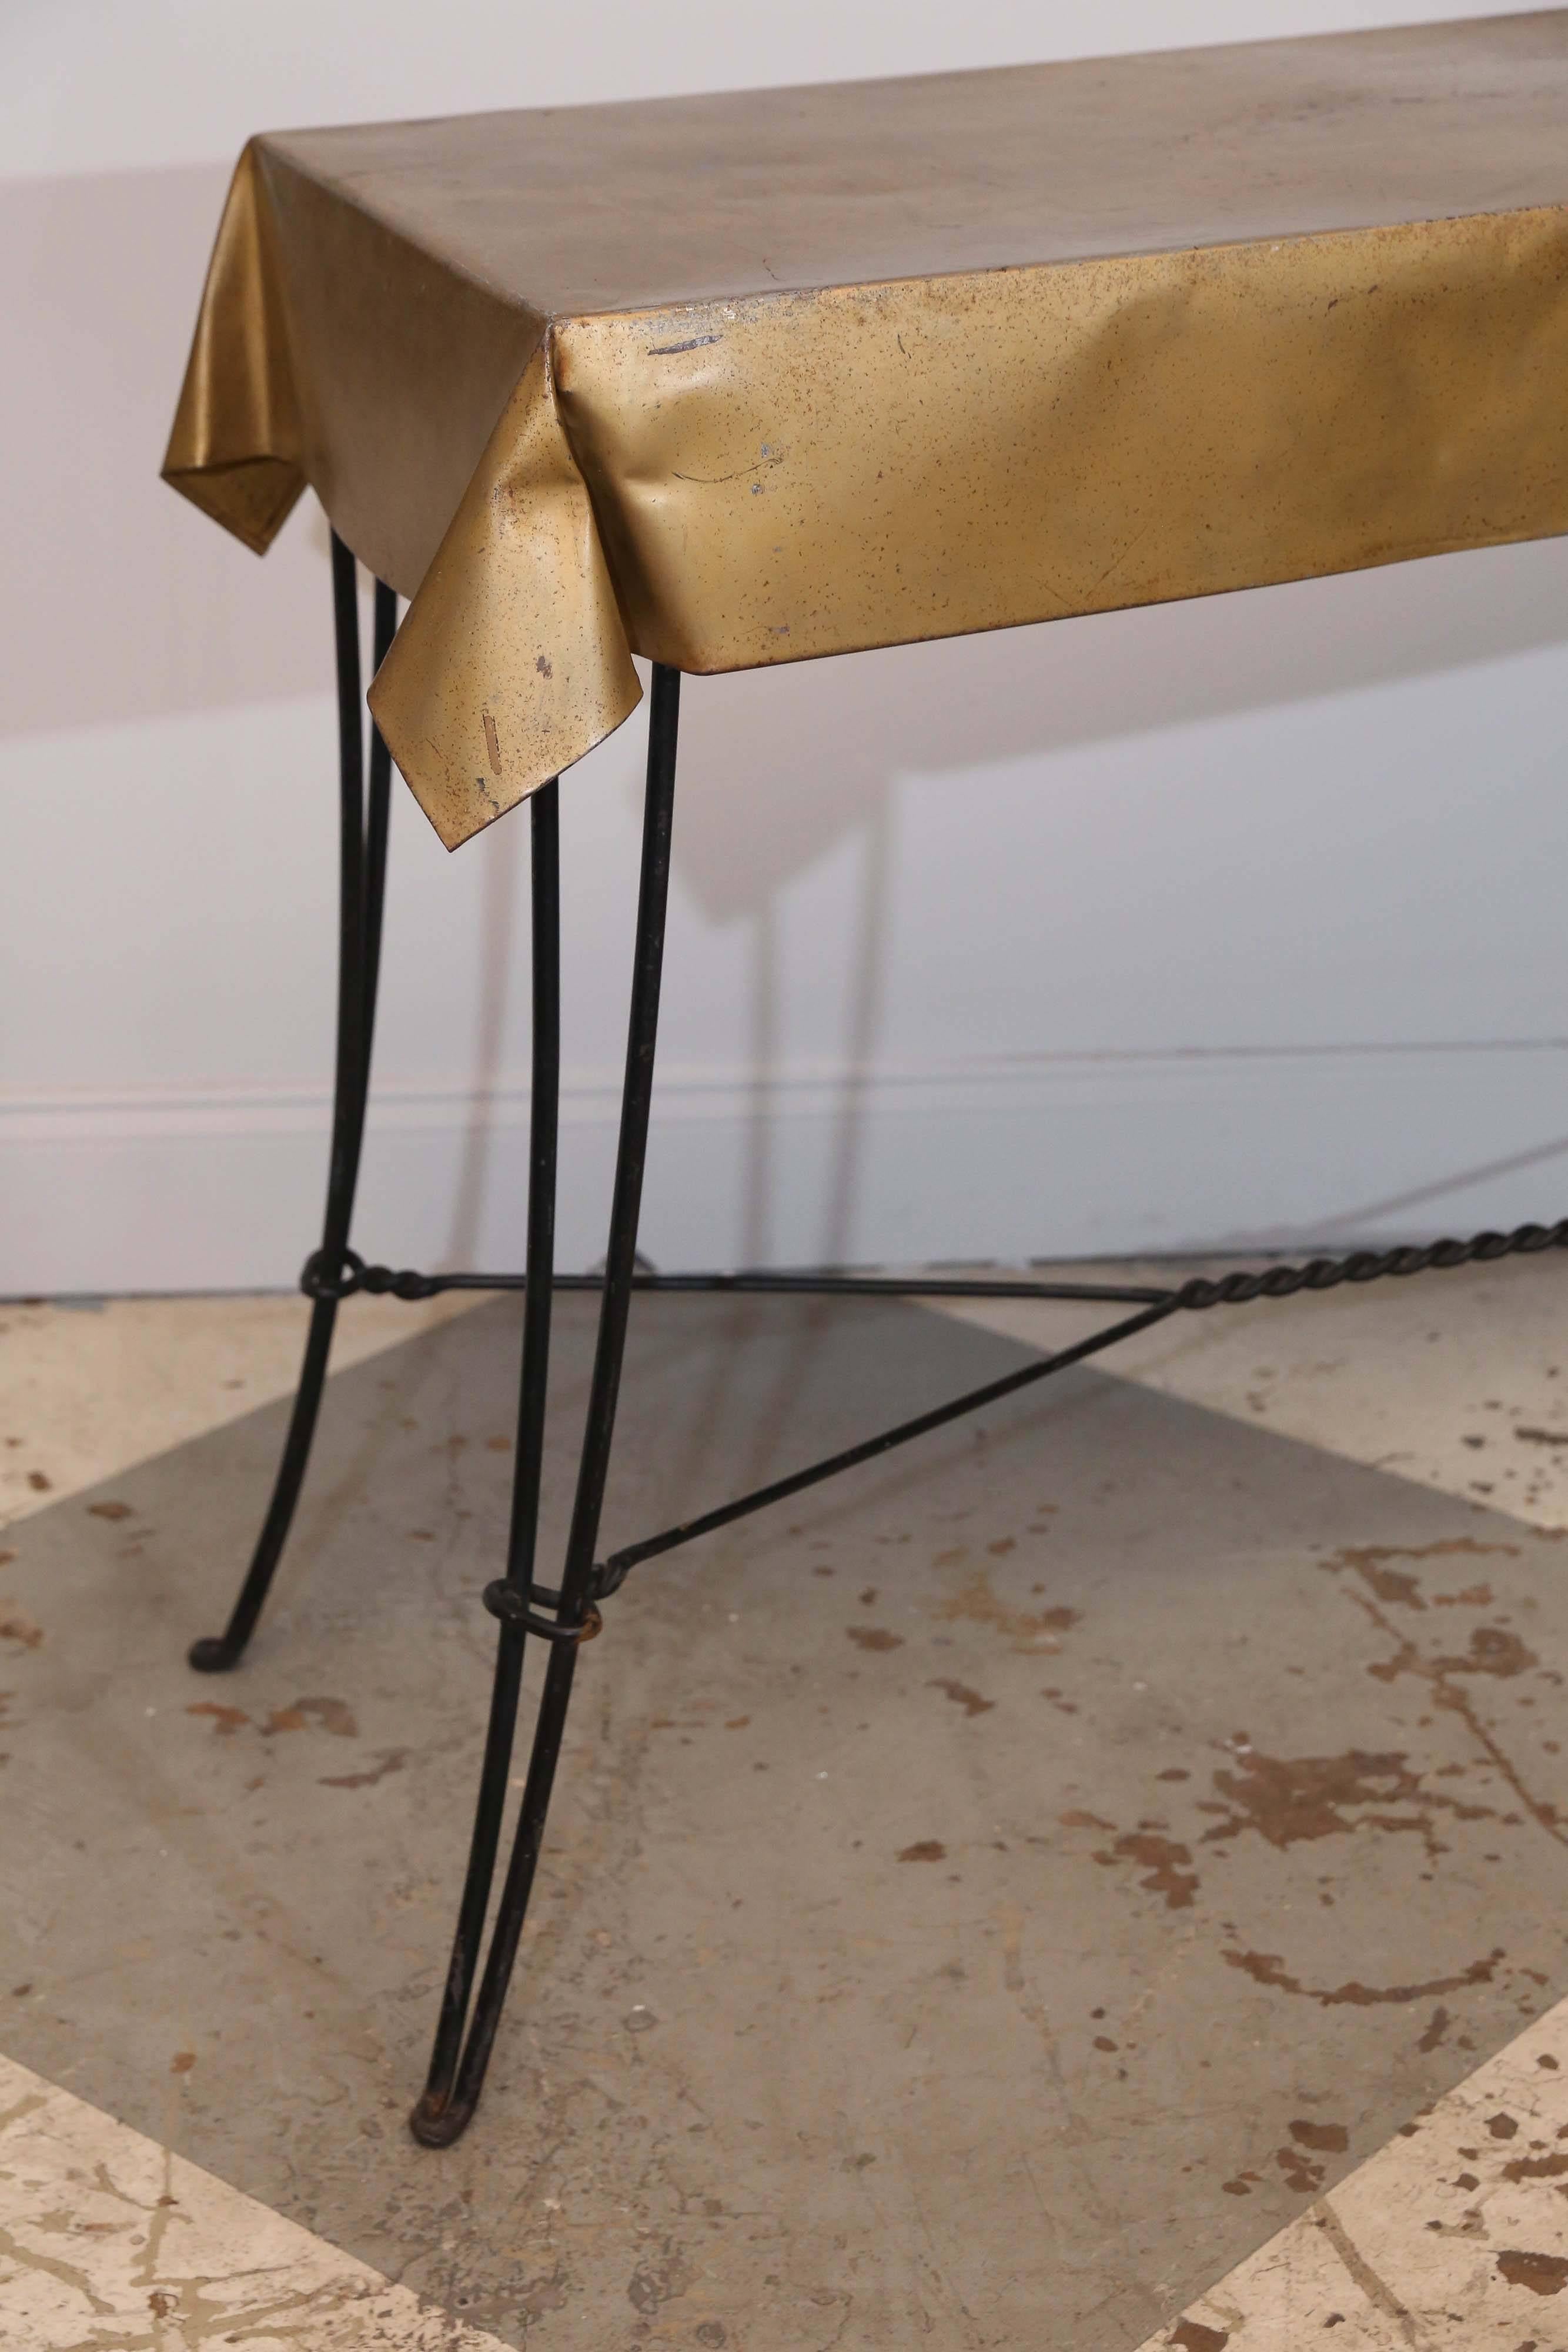 Vintage French console table discovered in Chartres, France. We just love the slender iron base of this Mid-Century design with the faux linen top crafted in painted metal.

Measures 47.5